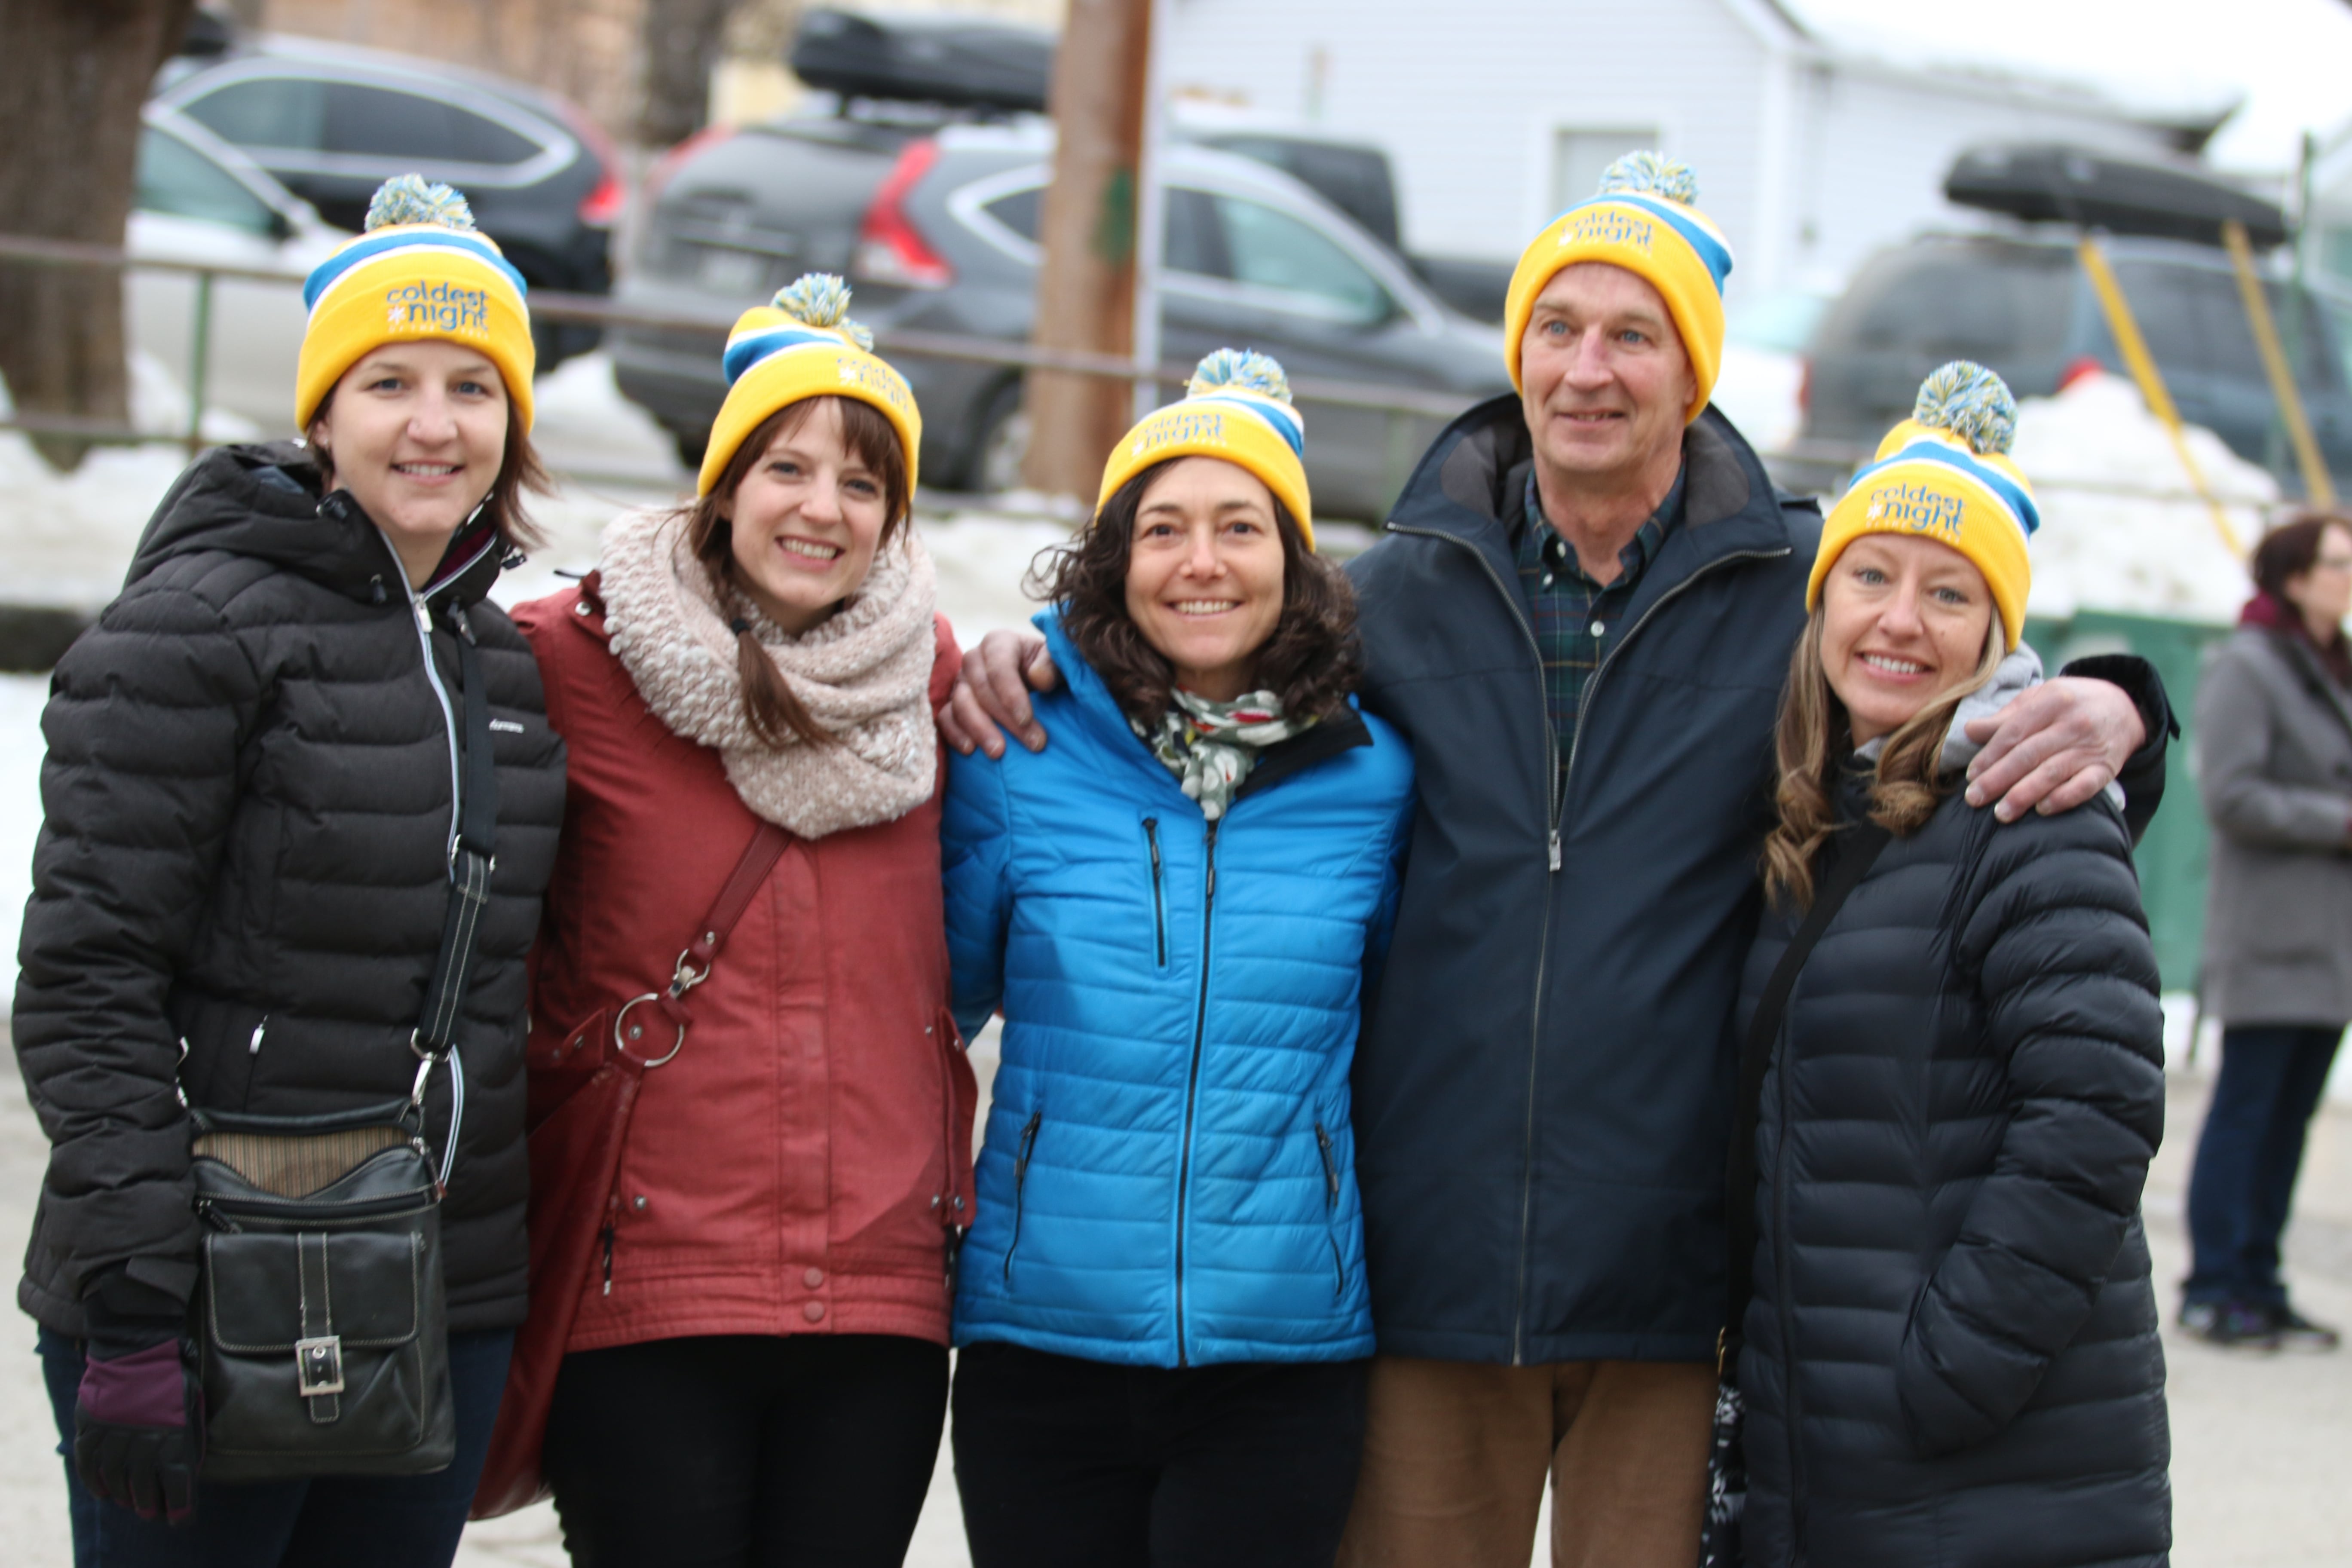 Nelson CARES Society sets up for fourth Annual Coldest Night of the Year Walk